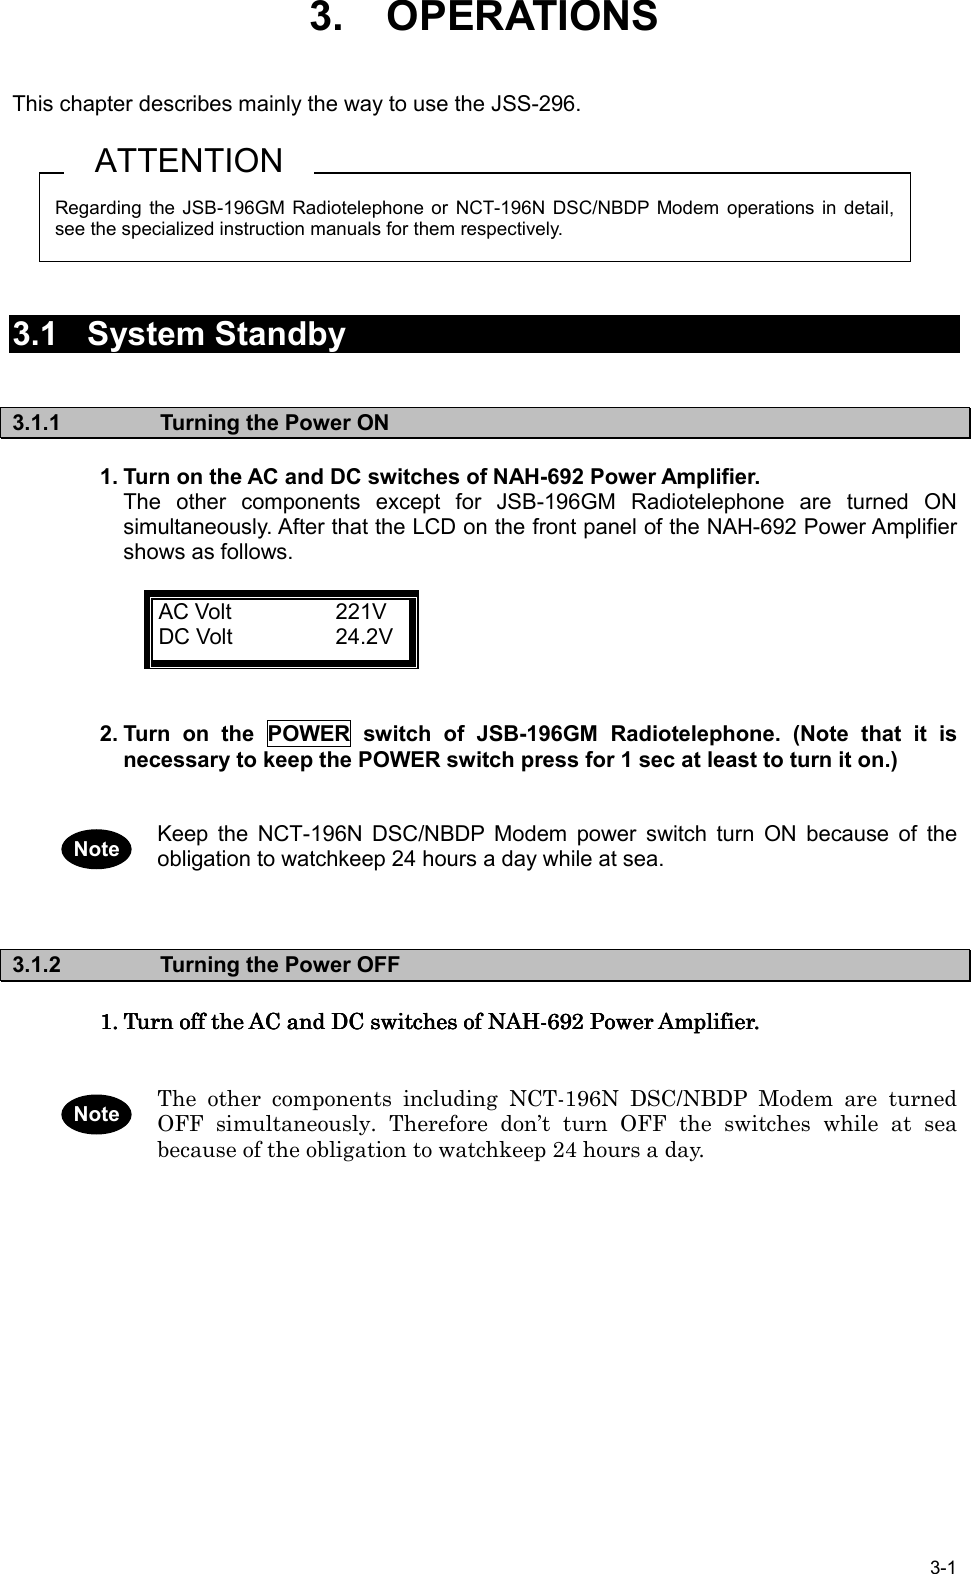 3-13.    OPERATIONSThis chapter describes mainly the way to use the JSS-296.3.1 System Standby3.1.1  Turning the Power ON1. Turn on the AC and DC switches of NAH-692 Power Amplifier.The other components except for JSB-196GM Radiotelephone are turned ONsimultaneously. After that the LCD on the front panel of the NAH-692 Power Amplifiershows as follows.AC Volt 221VDC Volt 24.2V2. Turn on the POWER switch of JSB-196GM Radiotelephone. (Note that it isnecessary to keep the POWER switch press for 1 sec at least to turn it on.)Keep the NCT-196N DSC/NBDP Modem power switch turn ON because of theobligation to watchkeep 24 hours a day while at sea.3.1.2  Turning the Power OFF1.1.1.1. Turn off the AC and DC switches of NAH-692 Power Amplifier.Turn off the AC and DC switches of NAH-692 Power Amplifier.Turn off the AC and DC switches of NAH-692 Power Amplifier.Turn off the AC and DC switches of NAH-692 Power Amplifier.The other components including NCT-196N DSC/NBDP Modem are turnedOFF simultaneously. Therefore don’t turn OFF the switches while at seabecause of the obligation to watchkeep 24 hours a day.Regarding the JSB-196GM Radiotelephone or NCT-196N DSC/NBDP Modem operations in detail,see the specialized instruction manuals for them respectively.ATTENTIONNoteNote